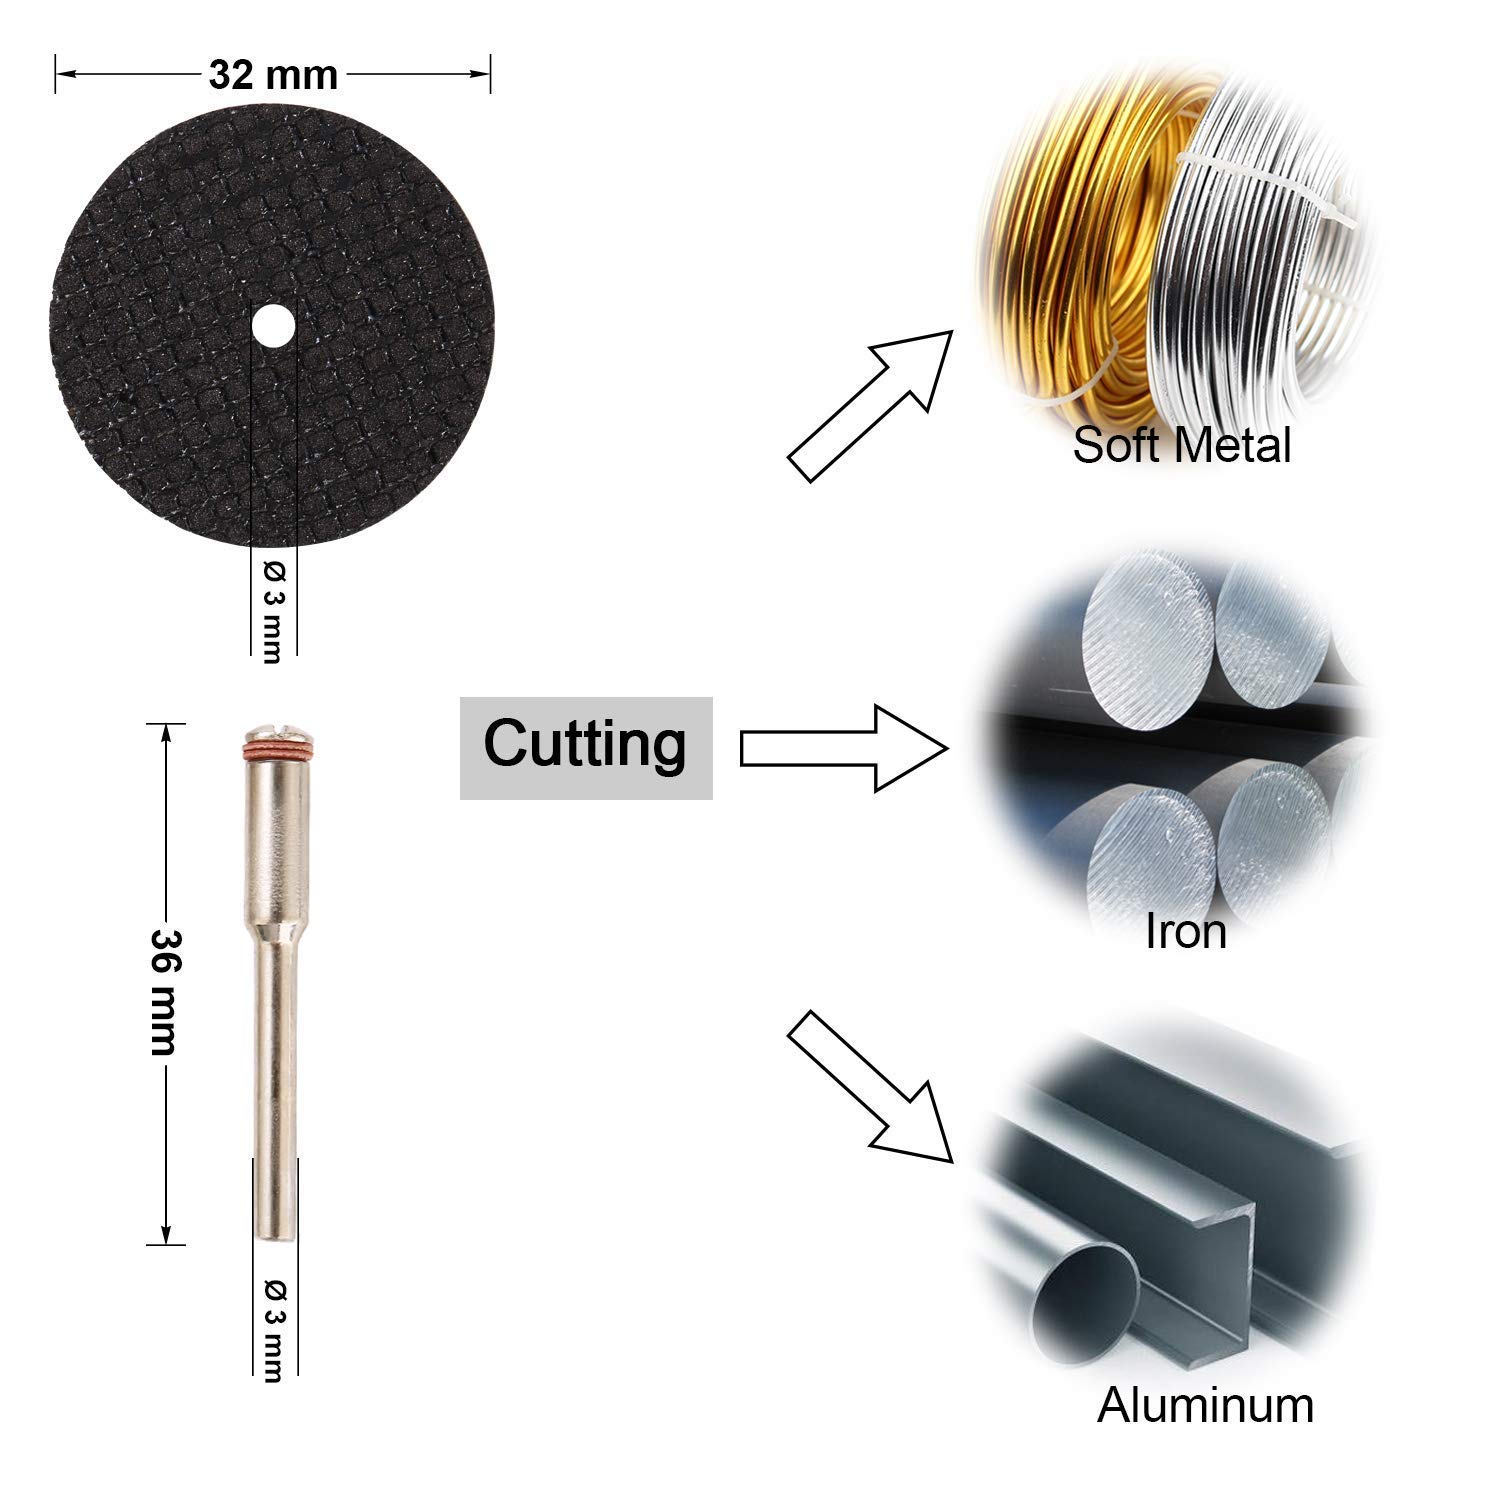 60Pcs Cutting Wheel Set for Rotary Tool -JUEMEL 1/8" Shank Diamond Cutting Wheel,Resin Cut Off Discs Combo Cutter Kit with 5 Mandrels for Wood Glass Plastic Stone Metal